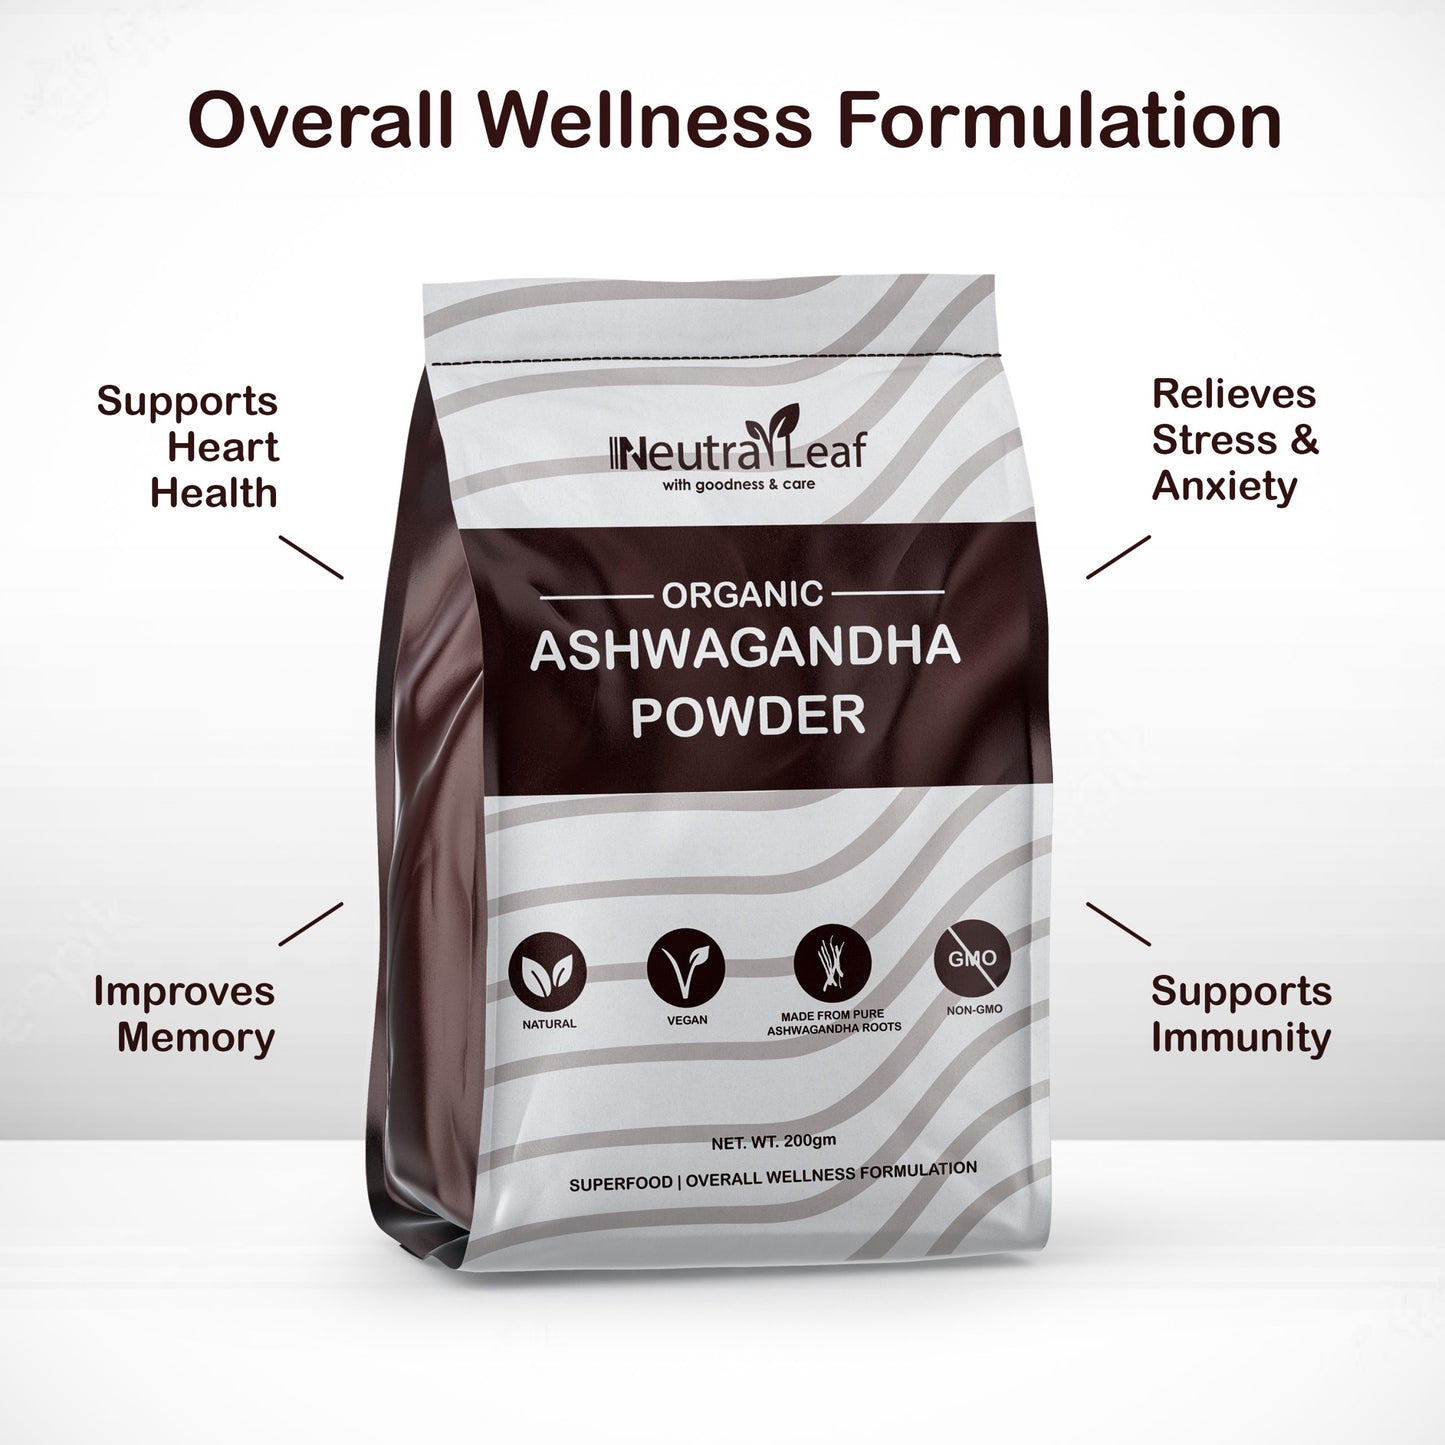 NeutraLeaf Organic Ashwagandha Root Powder | 200 Grams | Helps Fight Anxiety and Stress